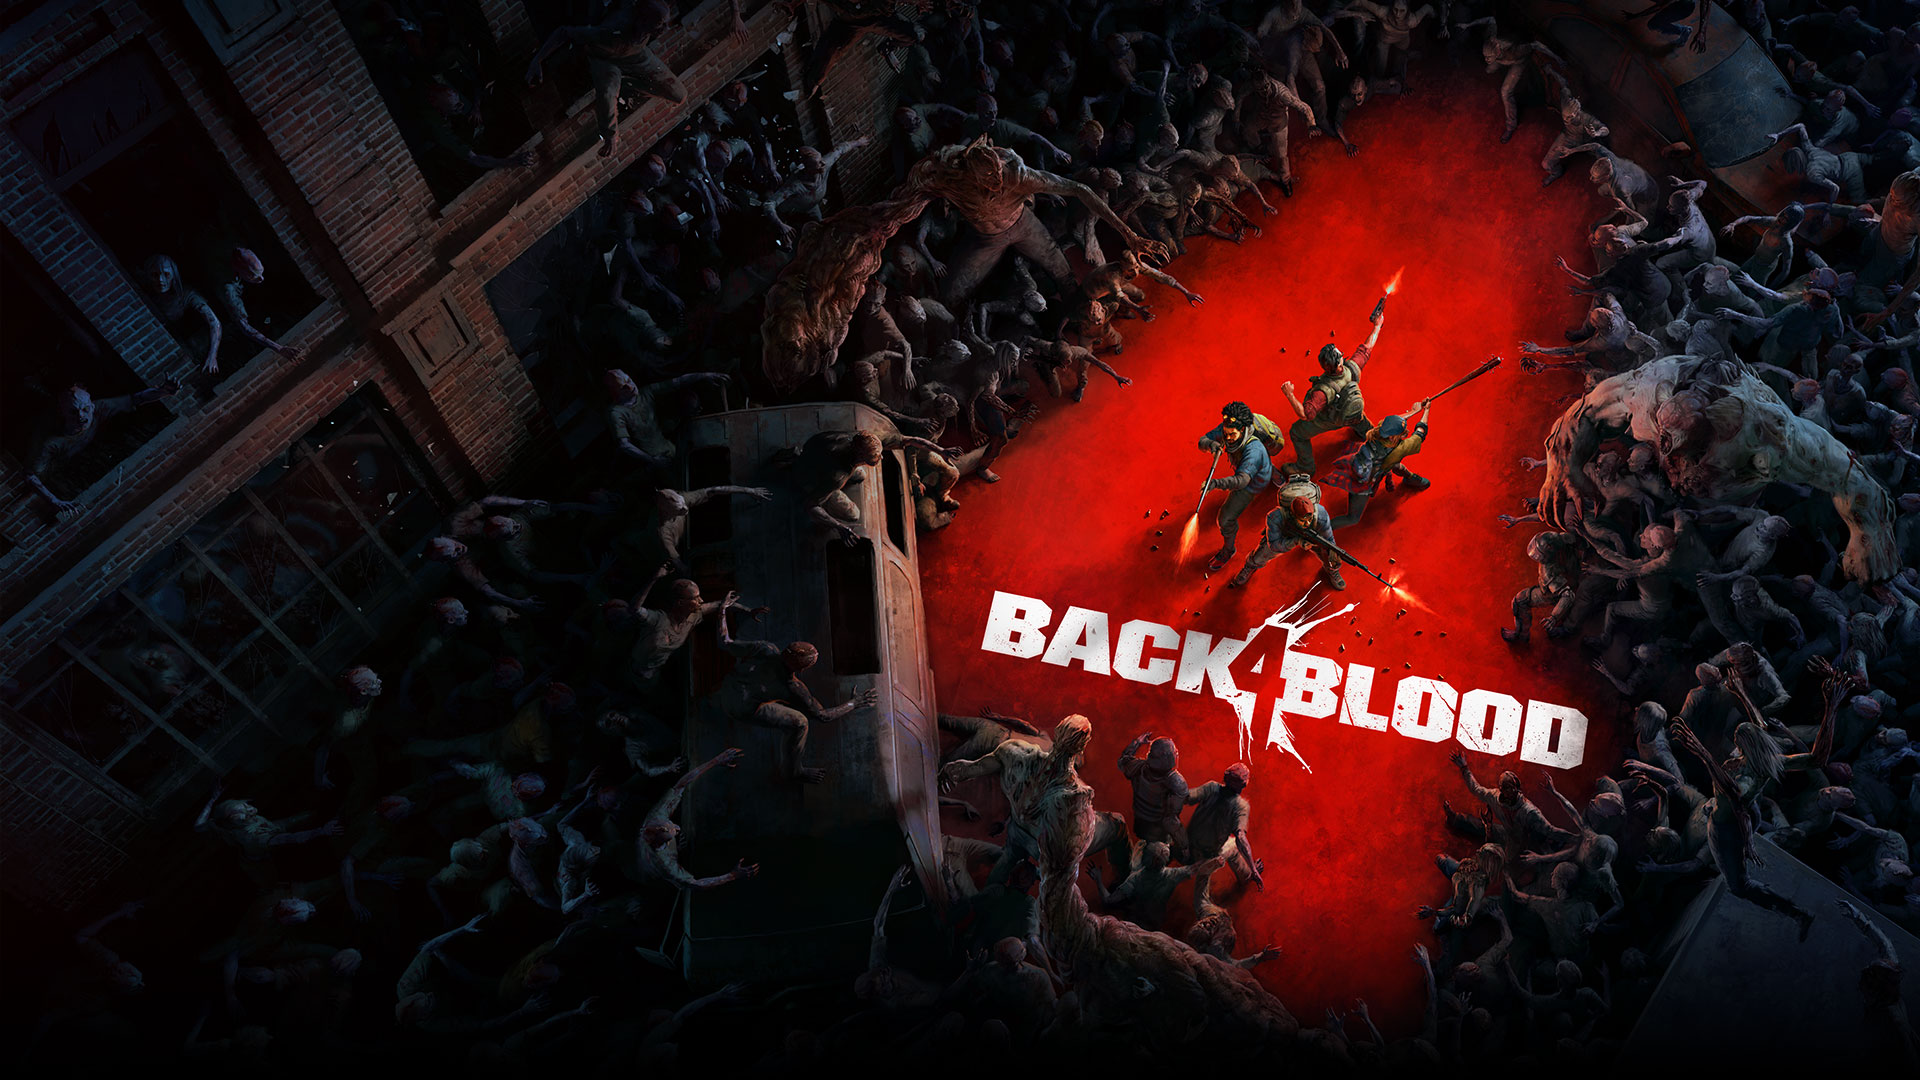 Back 4 Blood (PC) Review: The Most Fun You Can Have With Friends Online Right Now